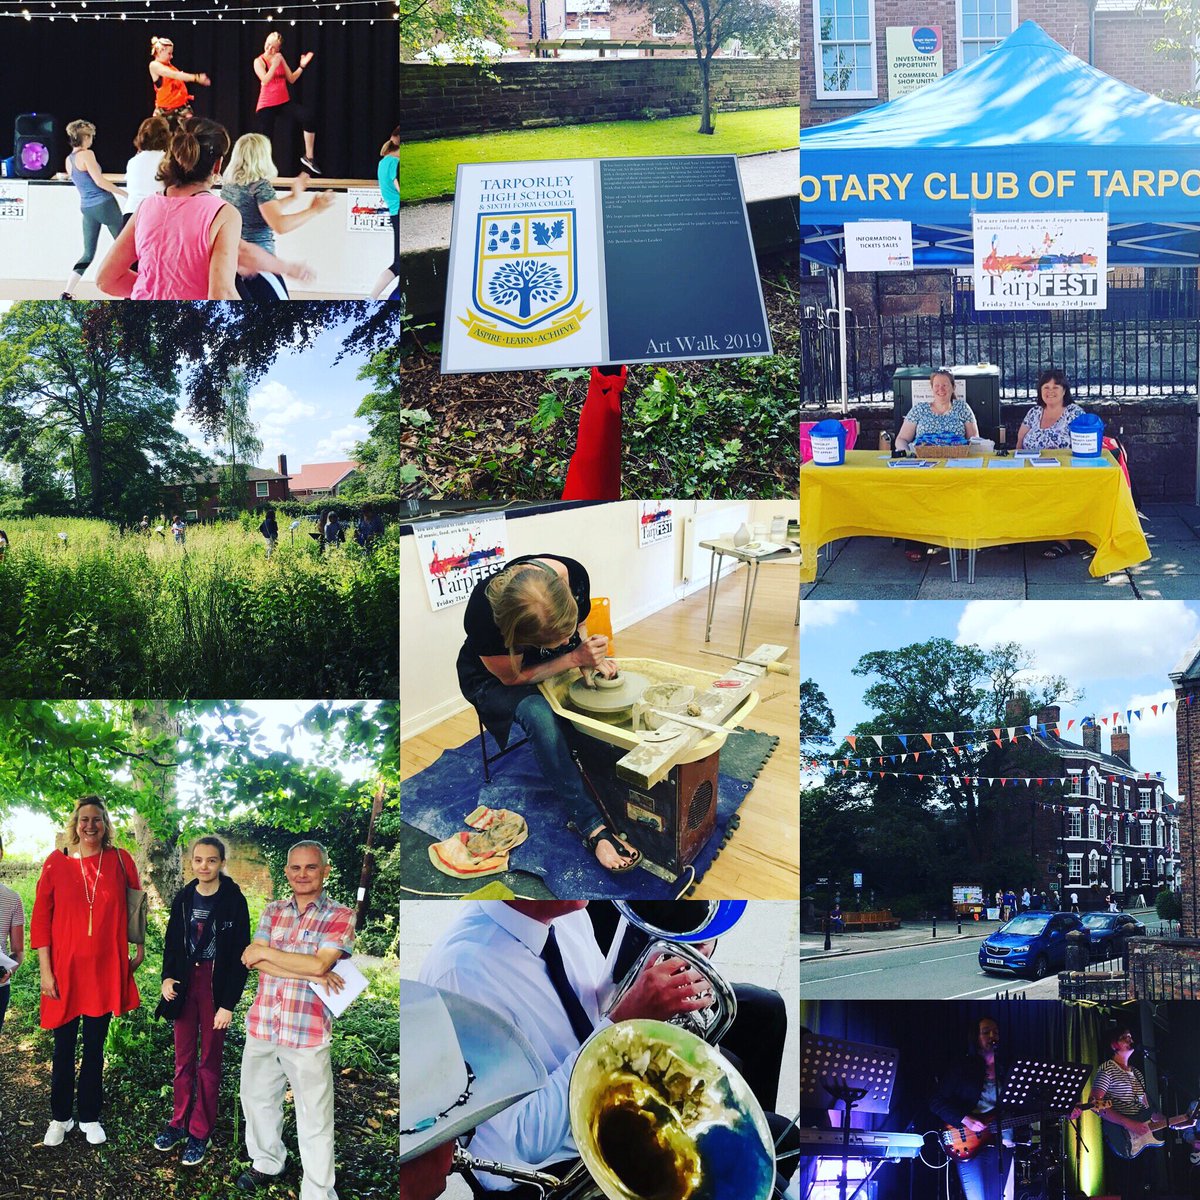 A massive thank you to everyone who came along to #tarpfest2019! What a great weekend! And thank you to all the local businesses and volunteers who made it all happen. See you at #tarpfest2020! #tarporley #cheshire #local